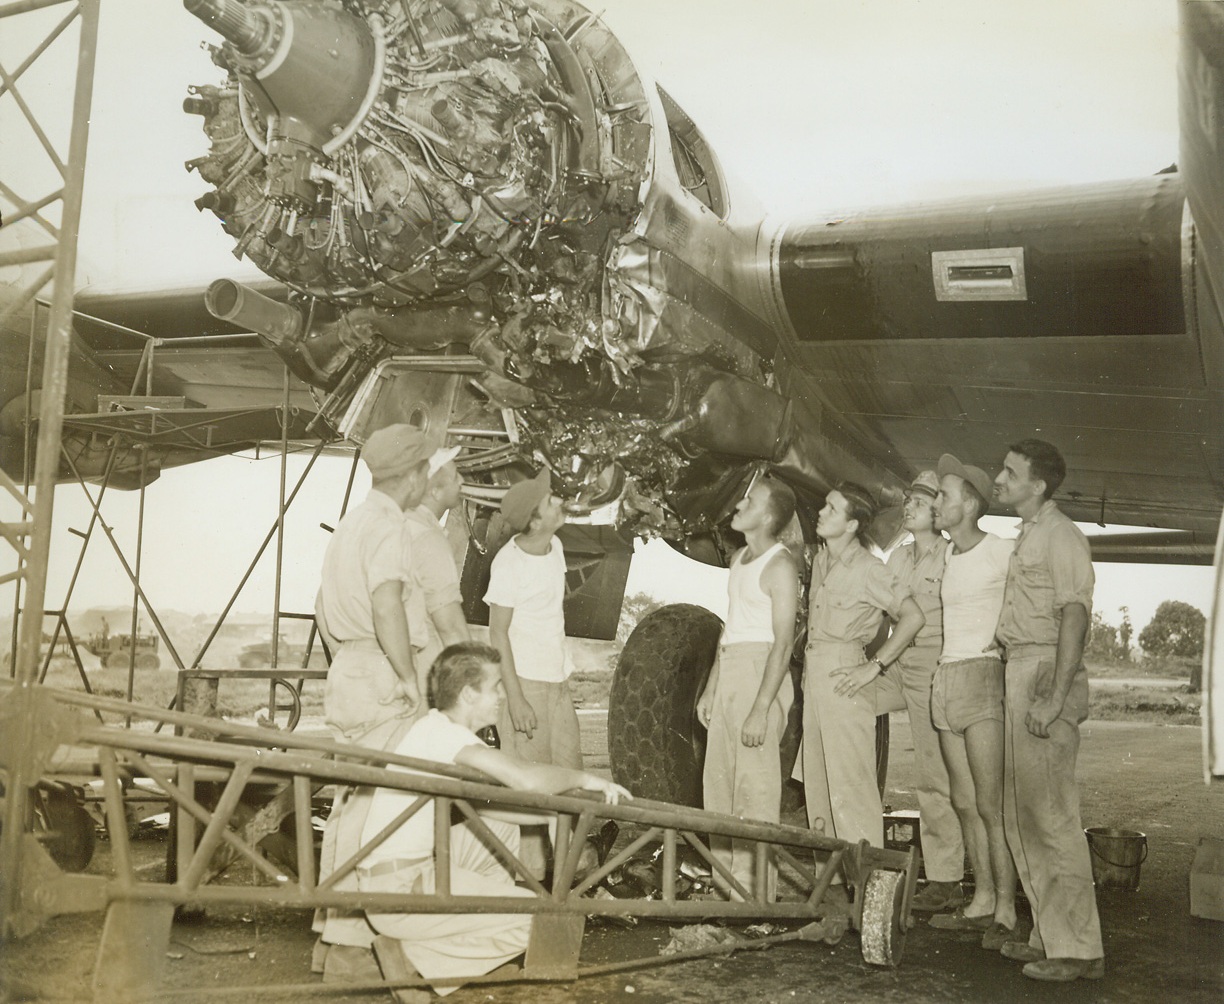 After Jap Plan Rammed Superfort, 12/14/1944. Saipan – Crew members of a B-29 Superfortress examine damage to one of the ship’s engines, rammed head-on by a Jap Tony fighter, during a raid on Japan, Dec 3.  The Nip’s wing was sheared off, it crashed into another Jap and both went down in flames.  The Superfort returned to its Saipan base on three engines.  Left to right, are: Cpl, Joseph C. Cook, of Tajunga, Calif., gunner, (kneeling); and (standing); Lt. Donald J. Dufford, Grand Junction, Colo., plane commander; Lt. Drayton K. Finney, Miles, Ohio, navigator; Cpl. George P. McGraw, Titusville, PA., gunner; Sgt. Robert H. Jay, Hobson, Mont., gunner; Sgt. Don M. Frensley, Duncan, Okla., radio operator; Lt. Roger S. Kolb, Spencer, Ind., flight engineer; Sgt. R.V. Rainer, Grossbeck, Texas, gunner; and Sgt. Salvatore A. Tabtaglione, New York, N.Y., central fire control gunner.Credit line (ACME);